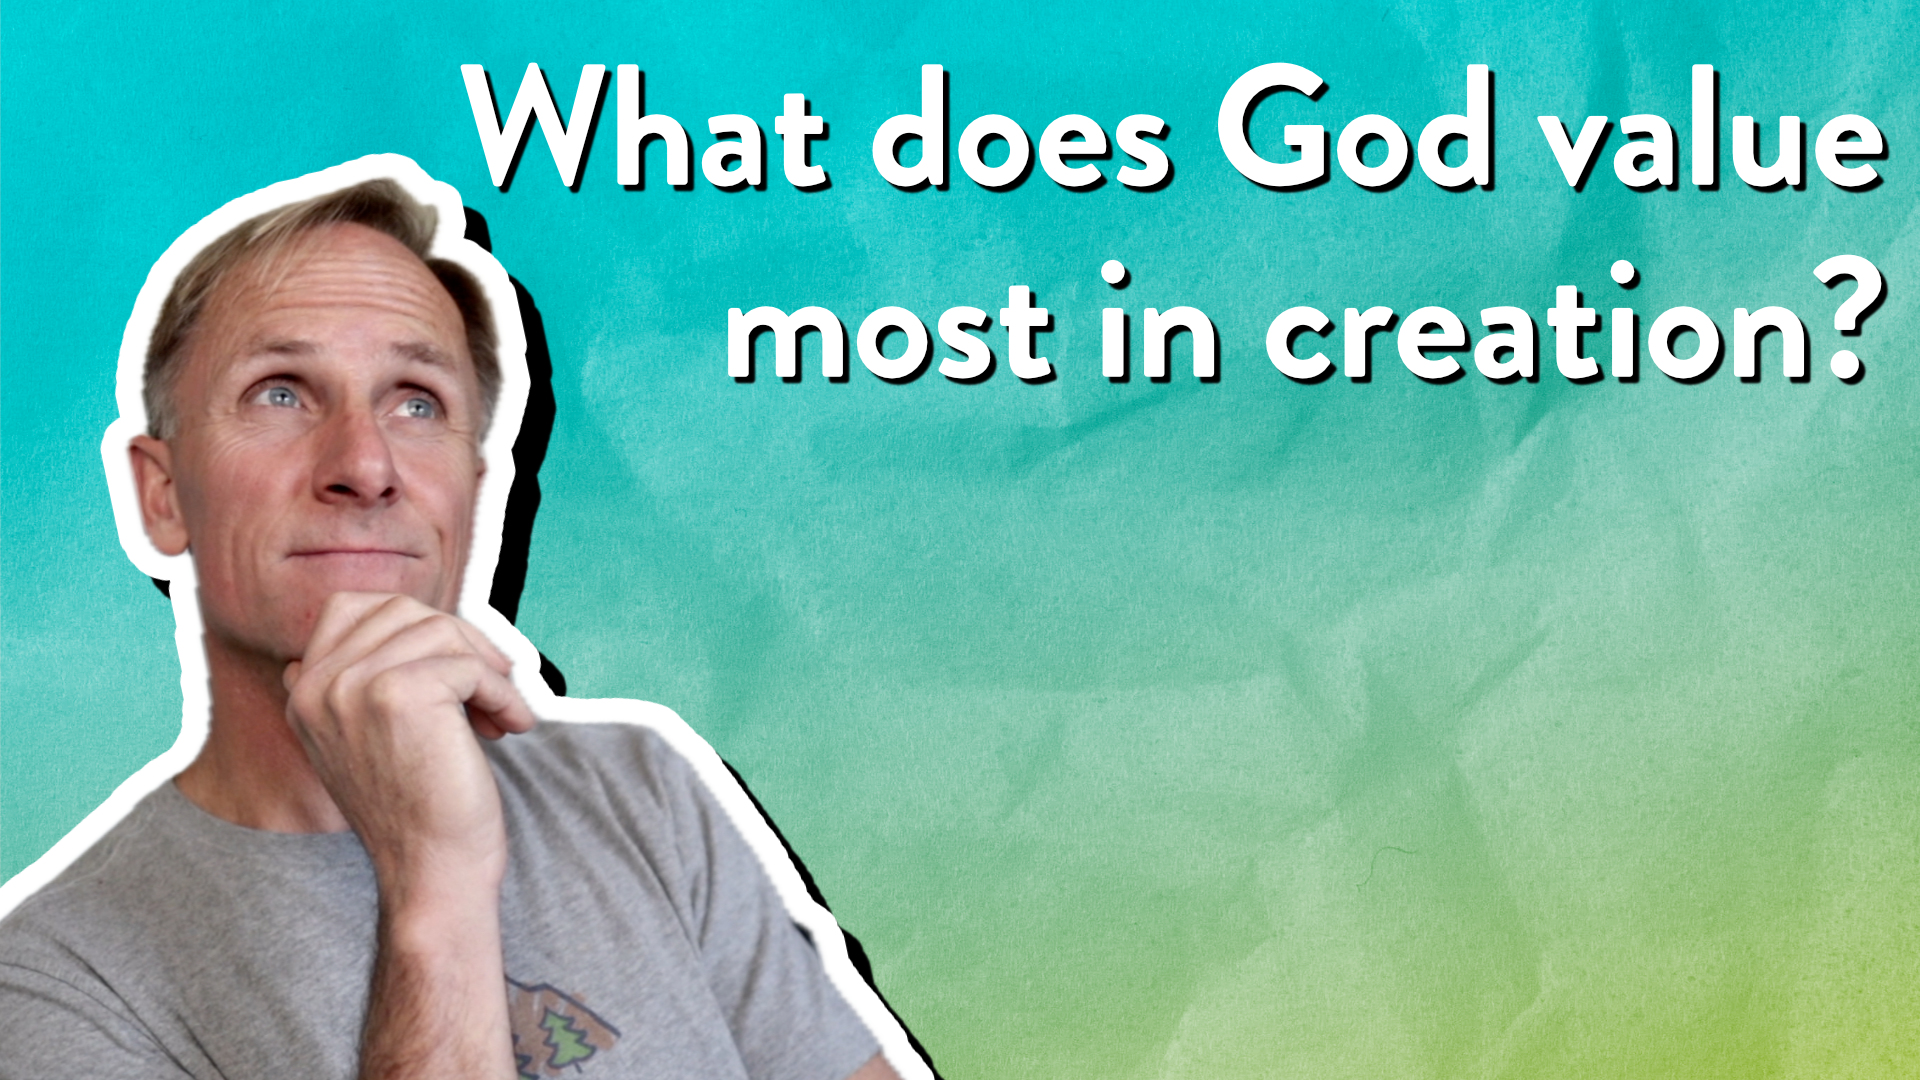 What does God value most in creation?